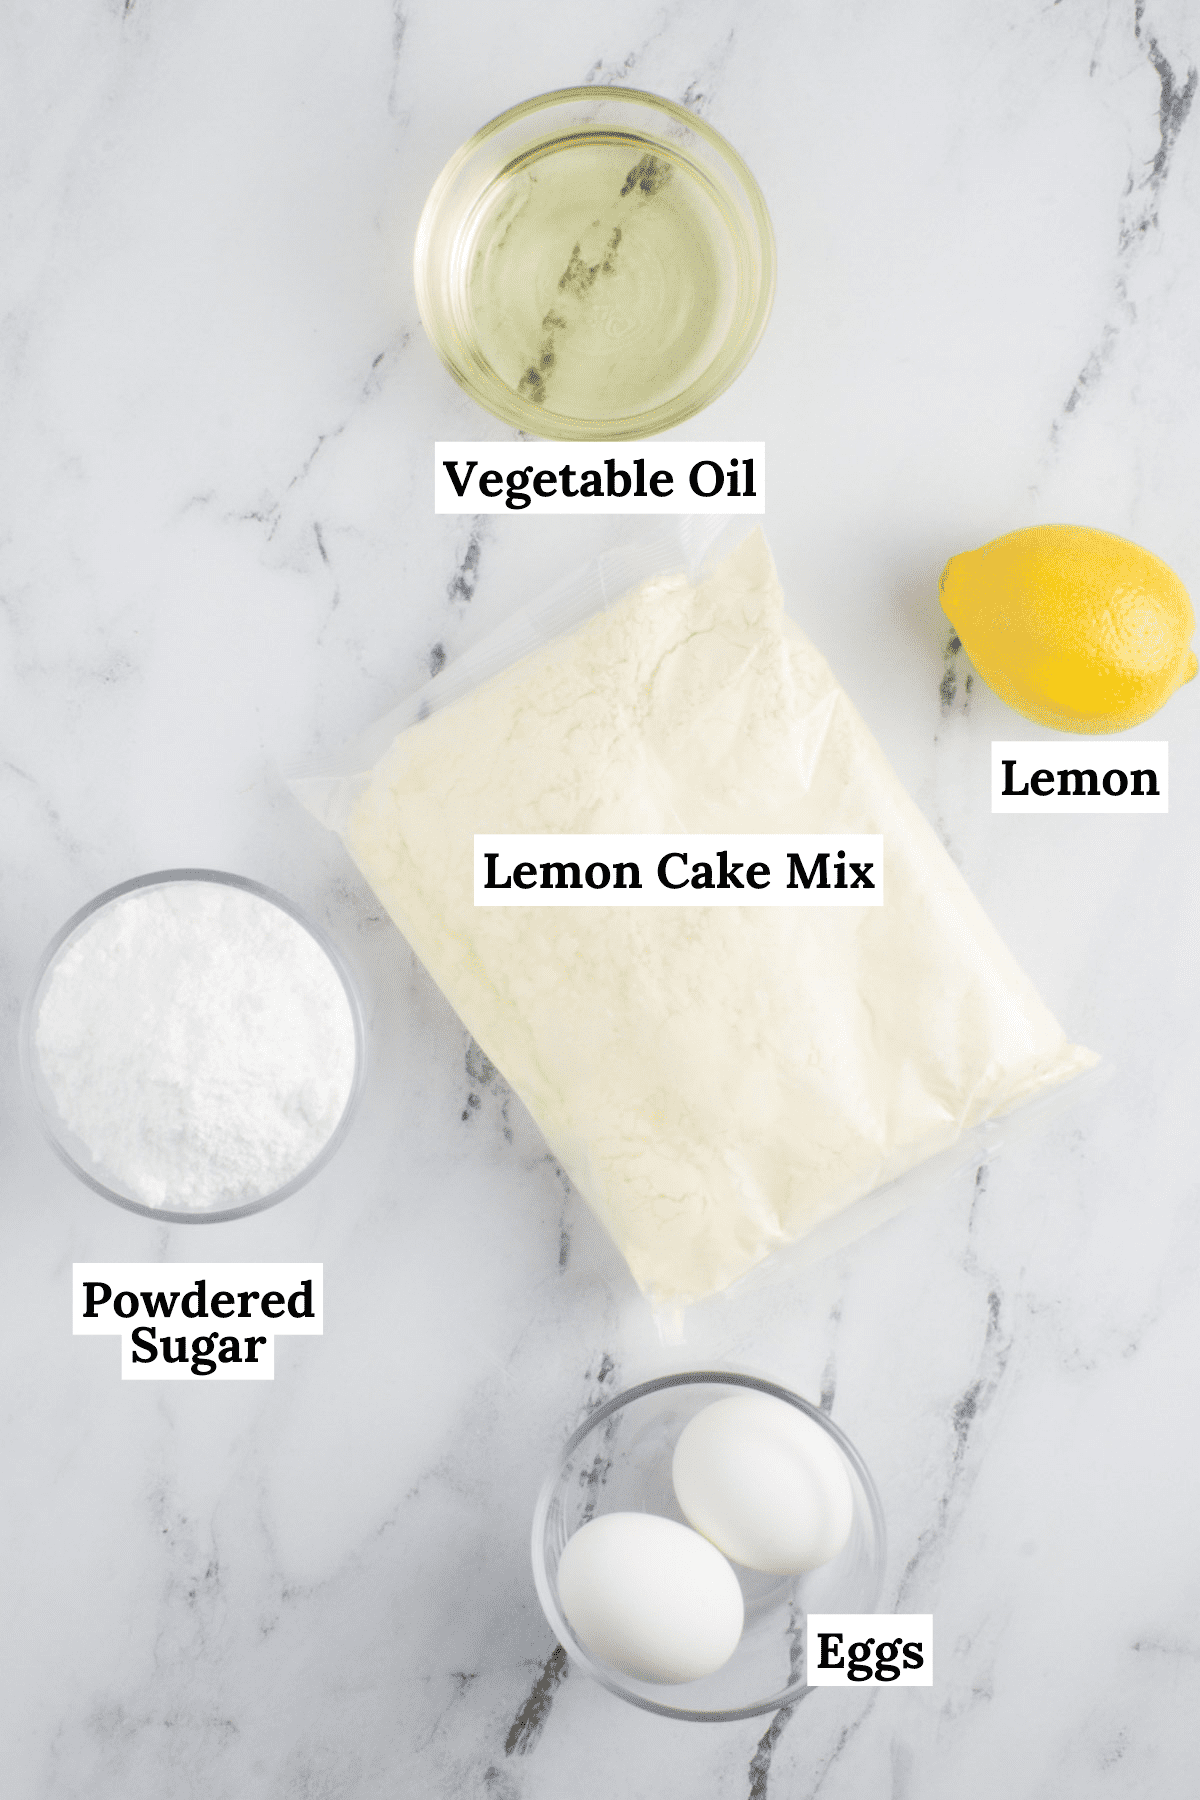 ingredients for lemon cake mix cookies arranged on a countertop including eggs, a bag of cake mix, powdered sugar, a lemon and vegetable oil